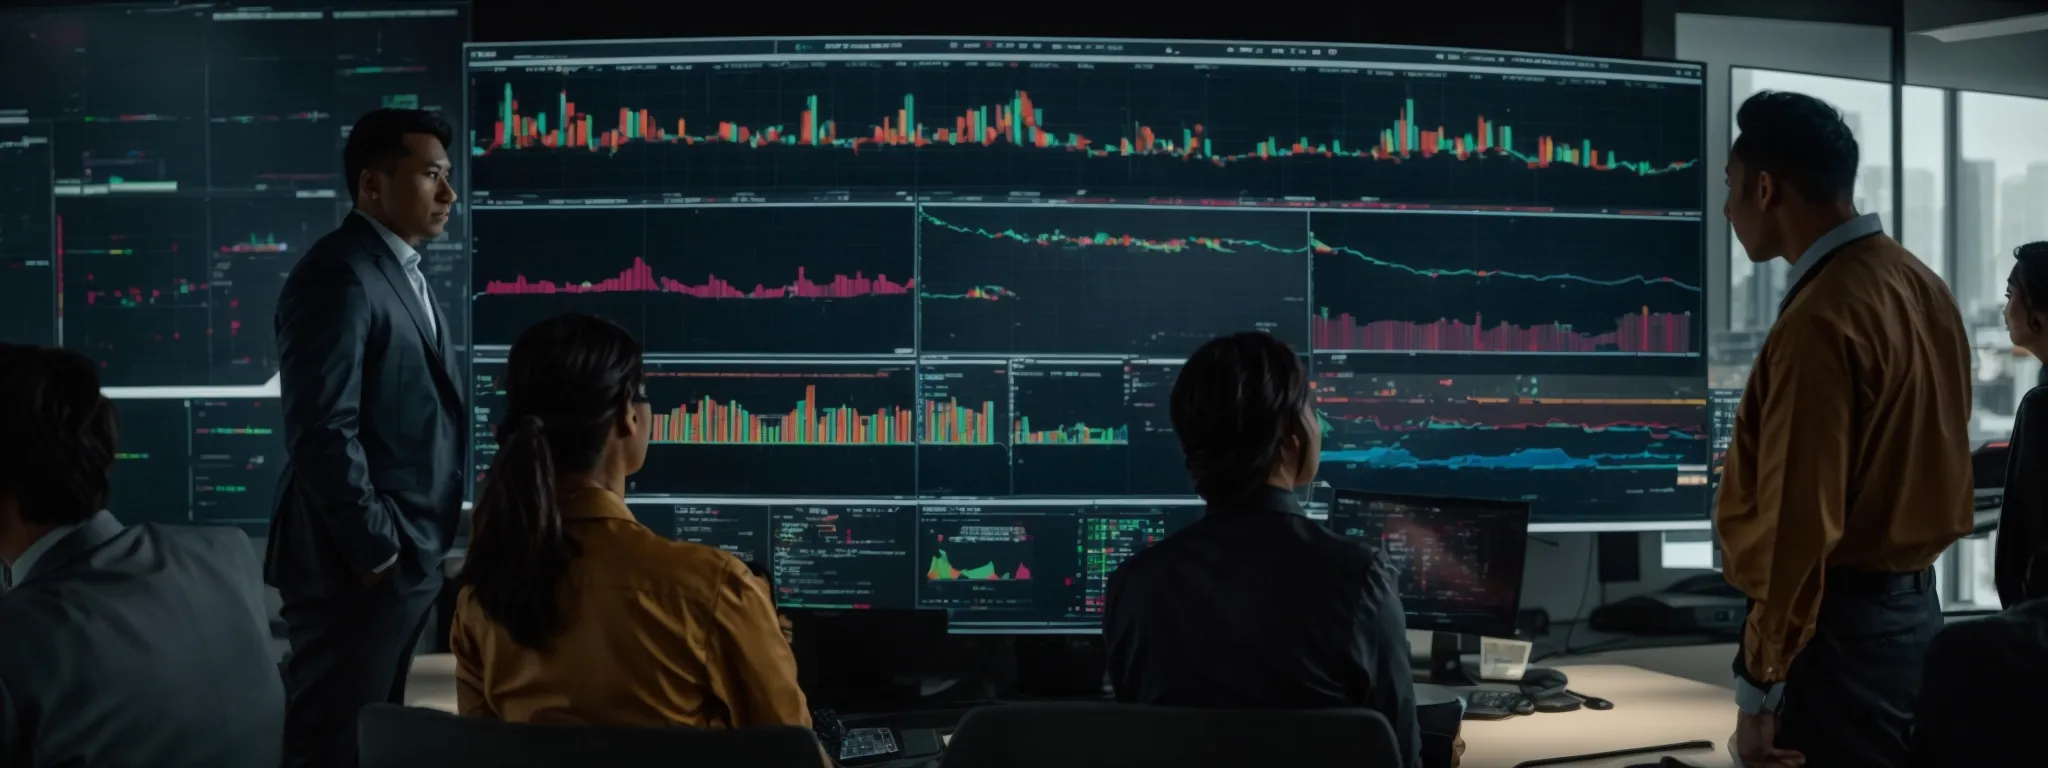 a group of professionals gathers around a large monitor displaying colorful graphs and data analytics.